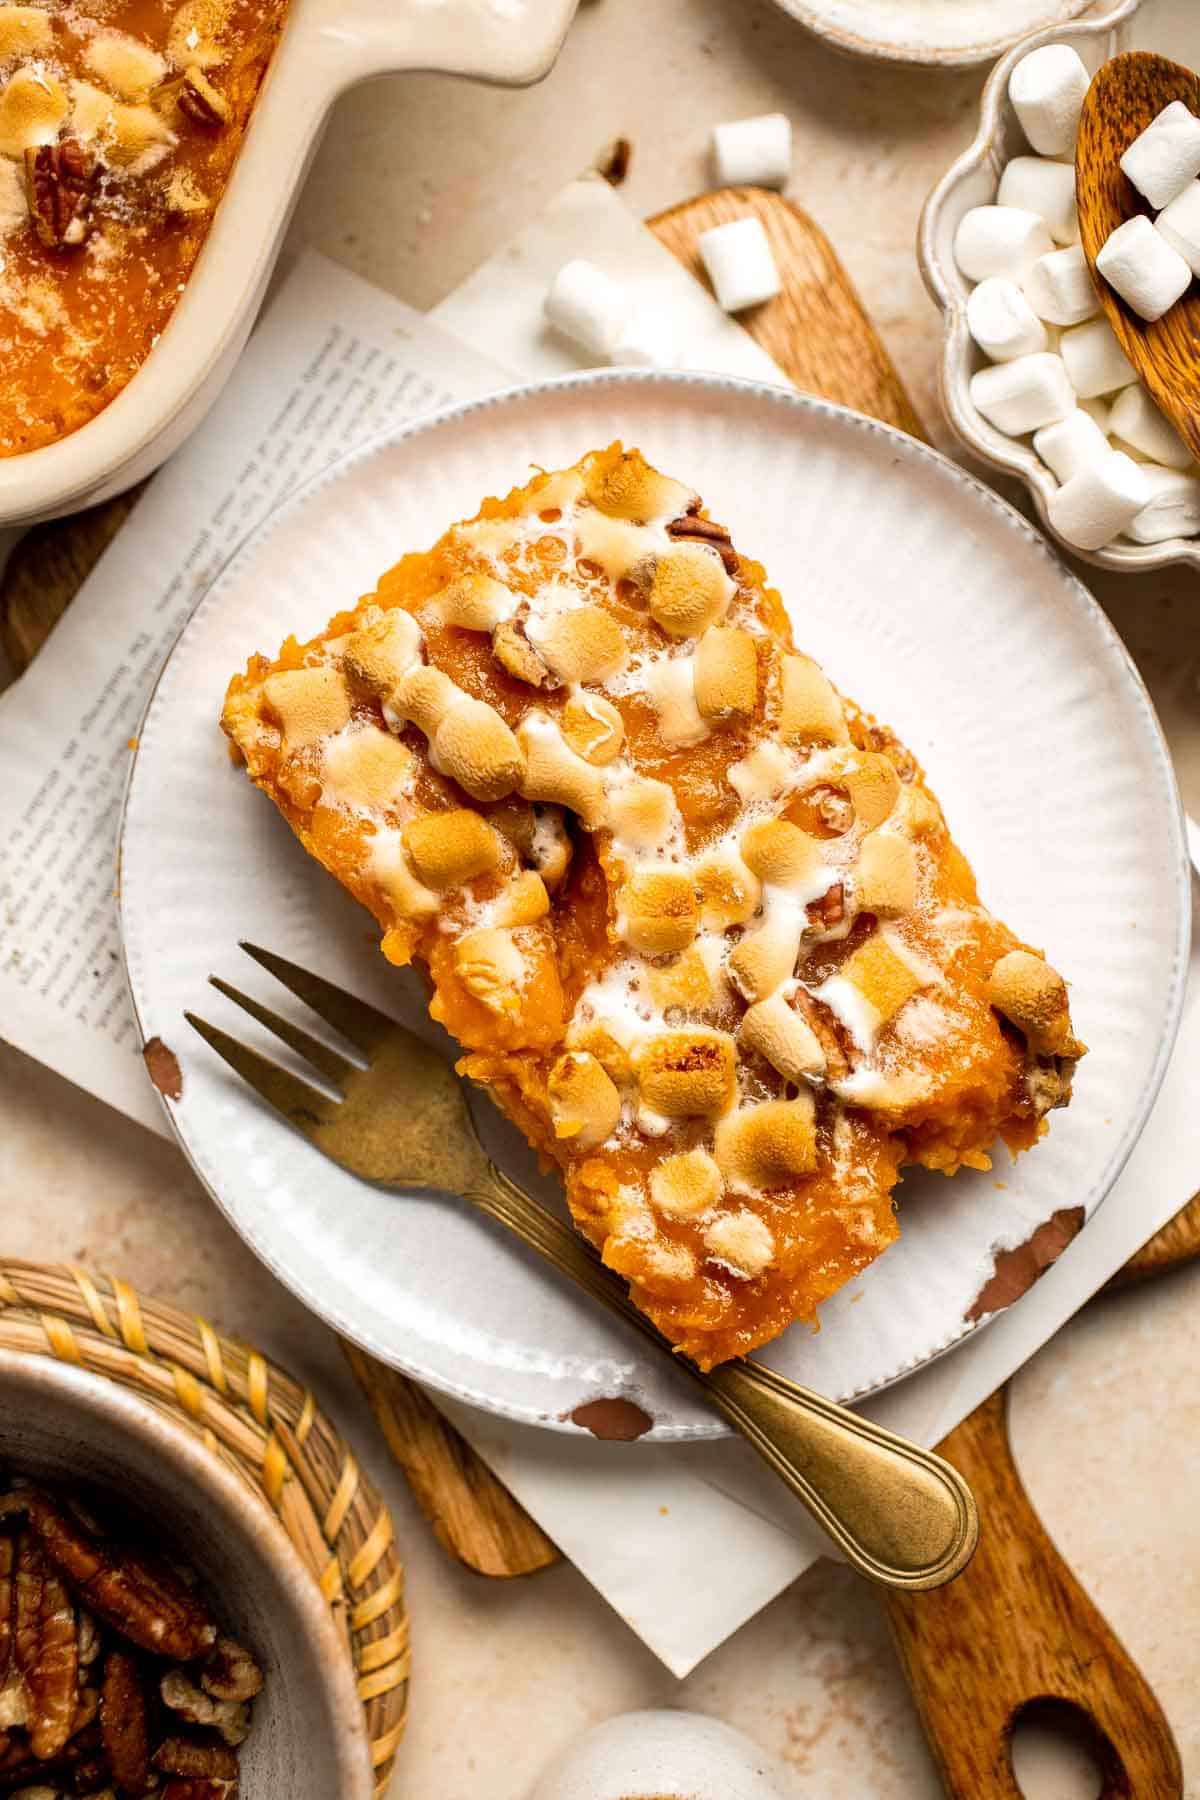 Sweet Potato Casserole with Marshmallows is a classic Thanksgiving side dish that is sweet and creamy with warm spices and molten, gooey marshmallows. | aheadofthyme.com